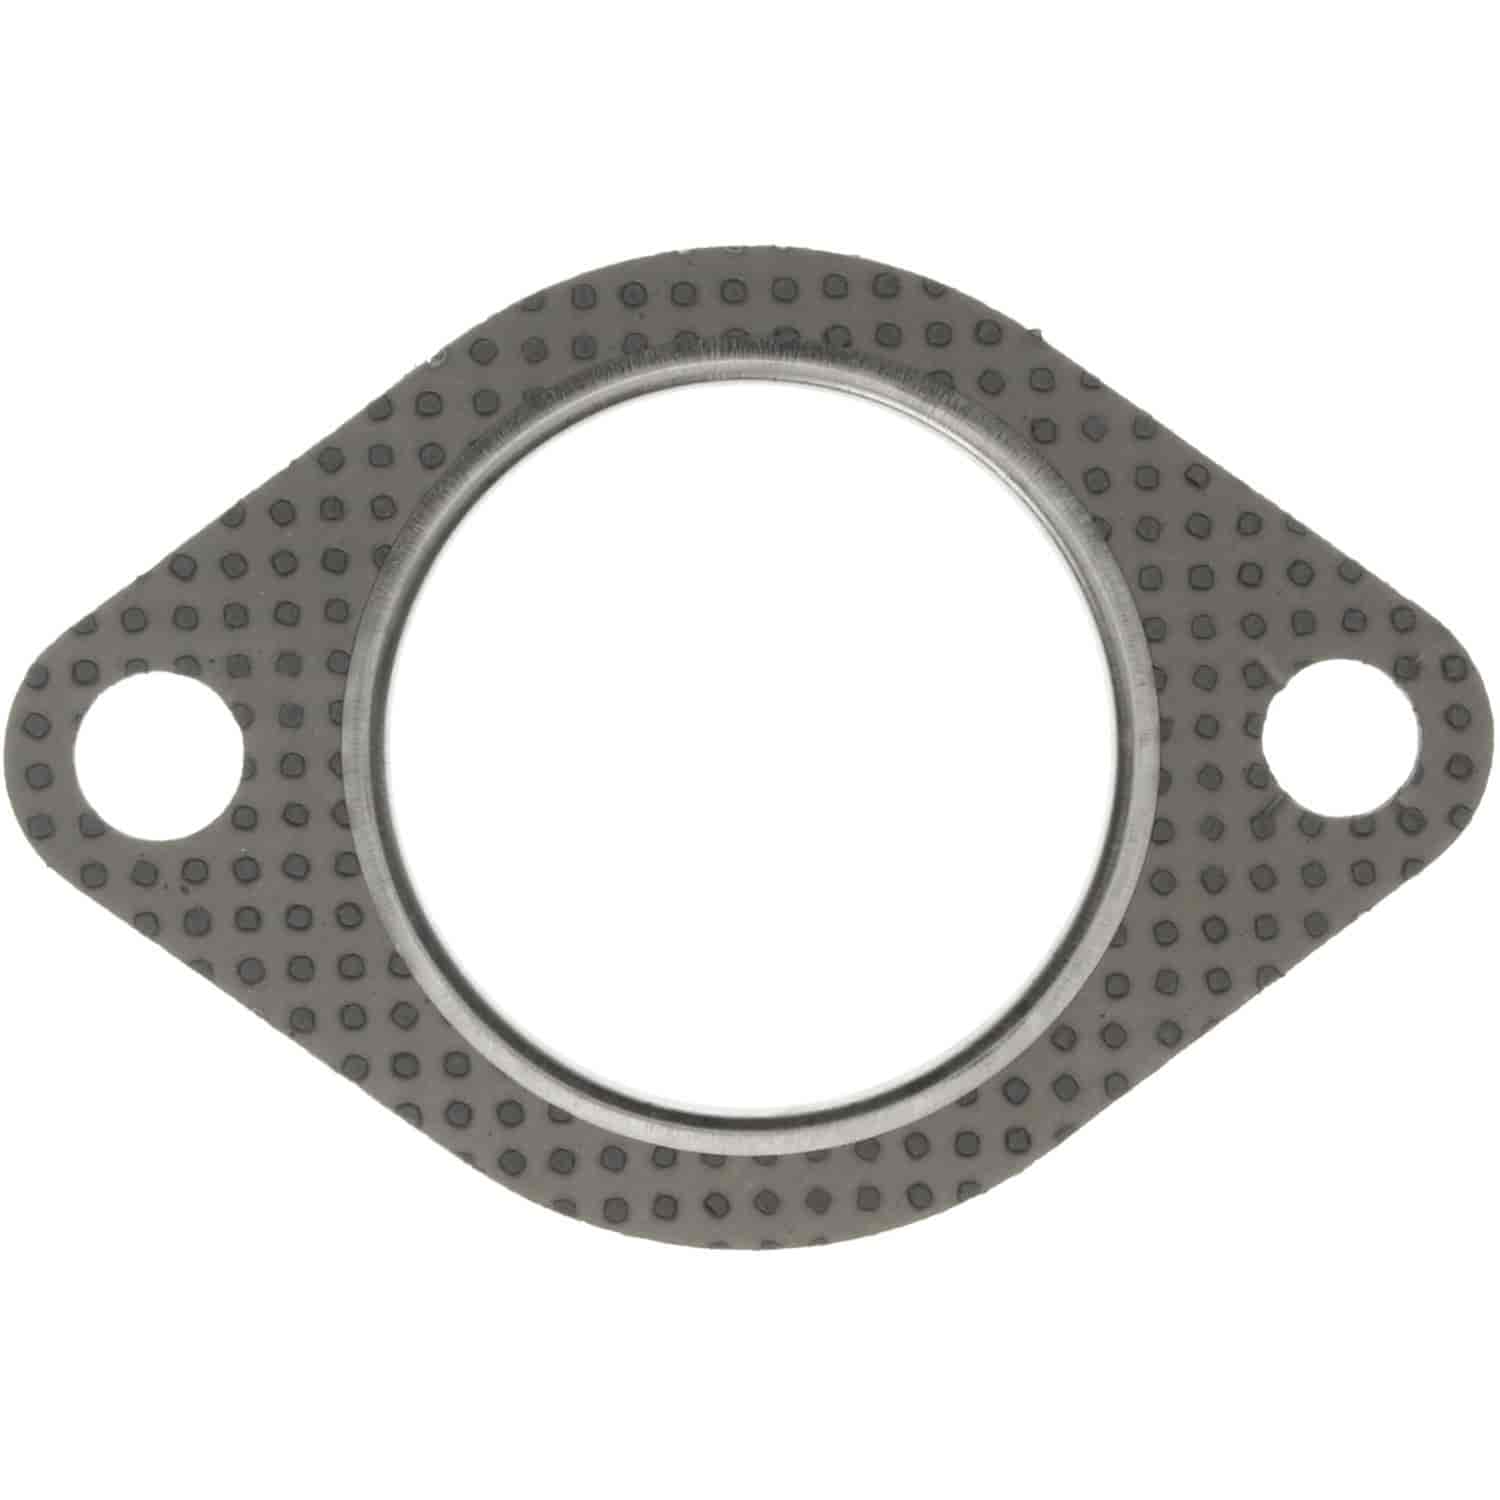 Catalytic Converter Gasket for Hyundai Excel w/1.5L 4 Cyl.Exc.Calif. 90-93 Front Catalytic Converter Gask